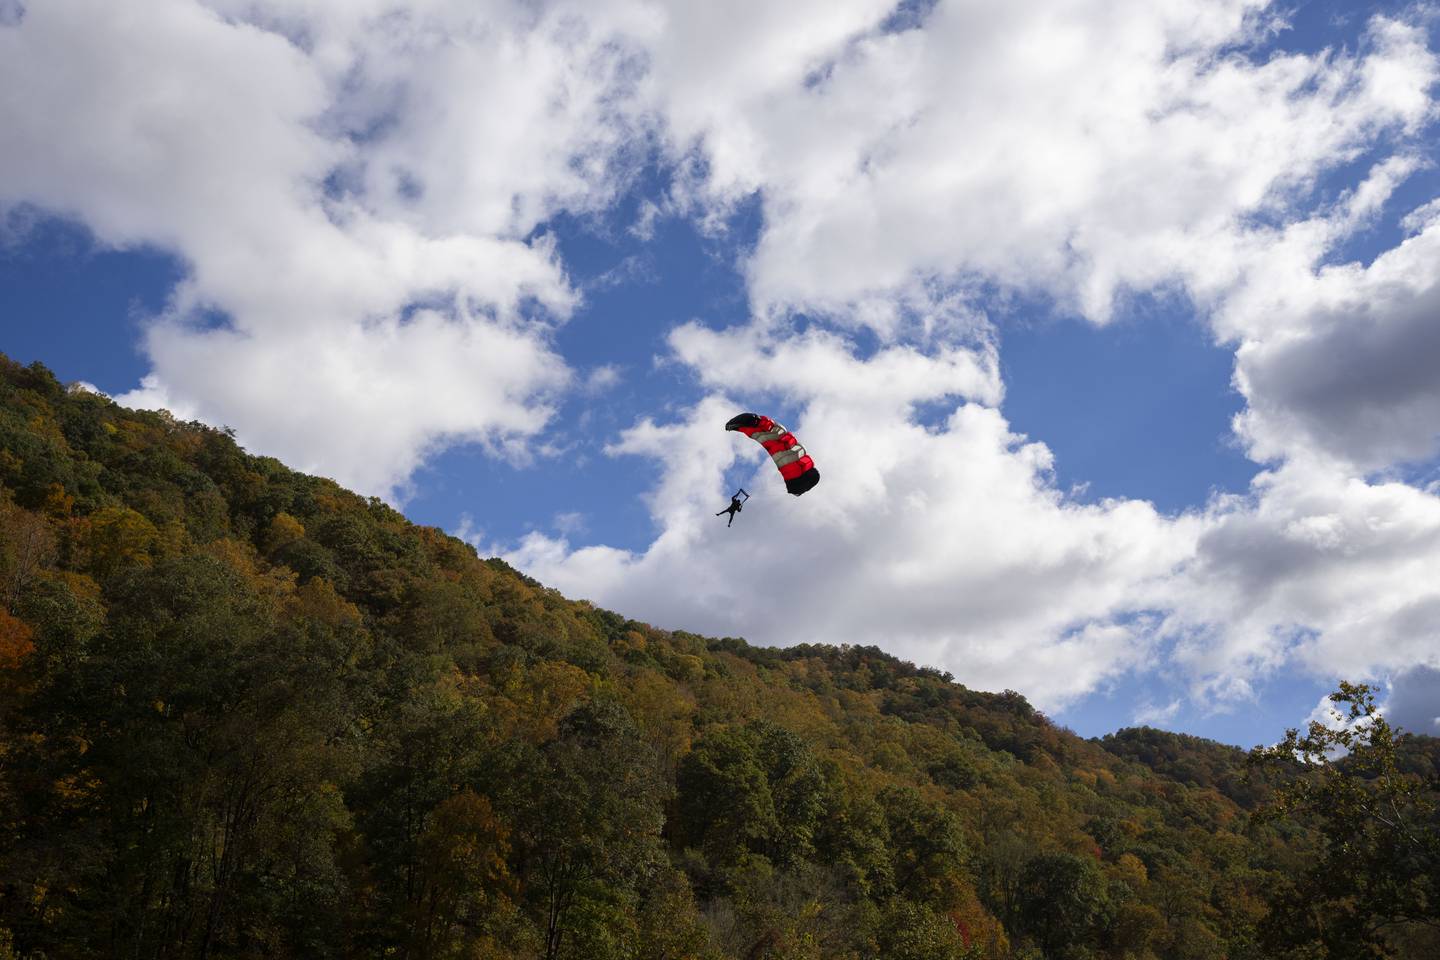 People from all over the world base jump off of the bridge during Bridge Day, an annual celebration of the famous New River Gorge Bridge in West Virginia. The bridge is currently the longest single-span steel arch bridge in the United States and the third highest bridge in the country.